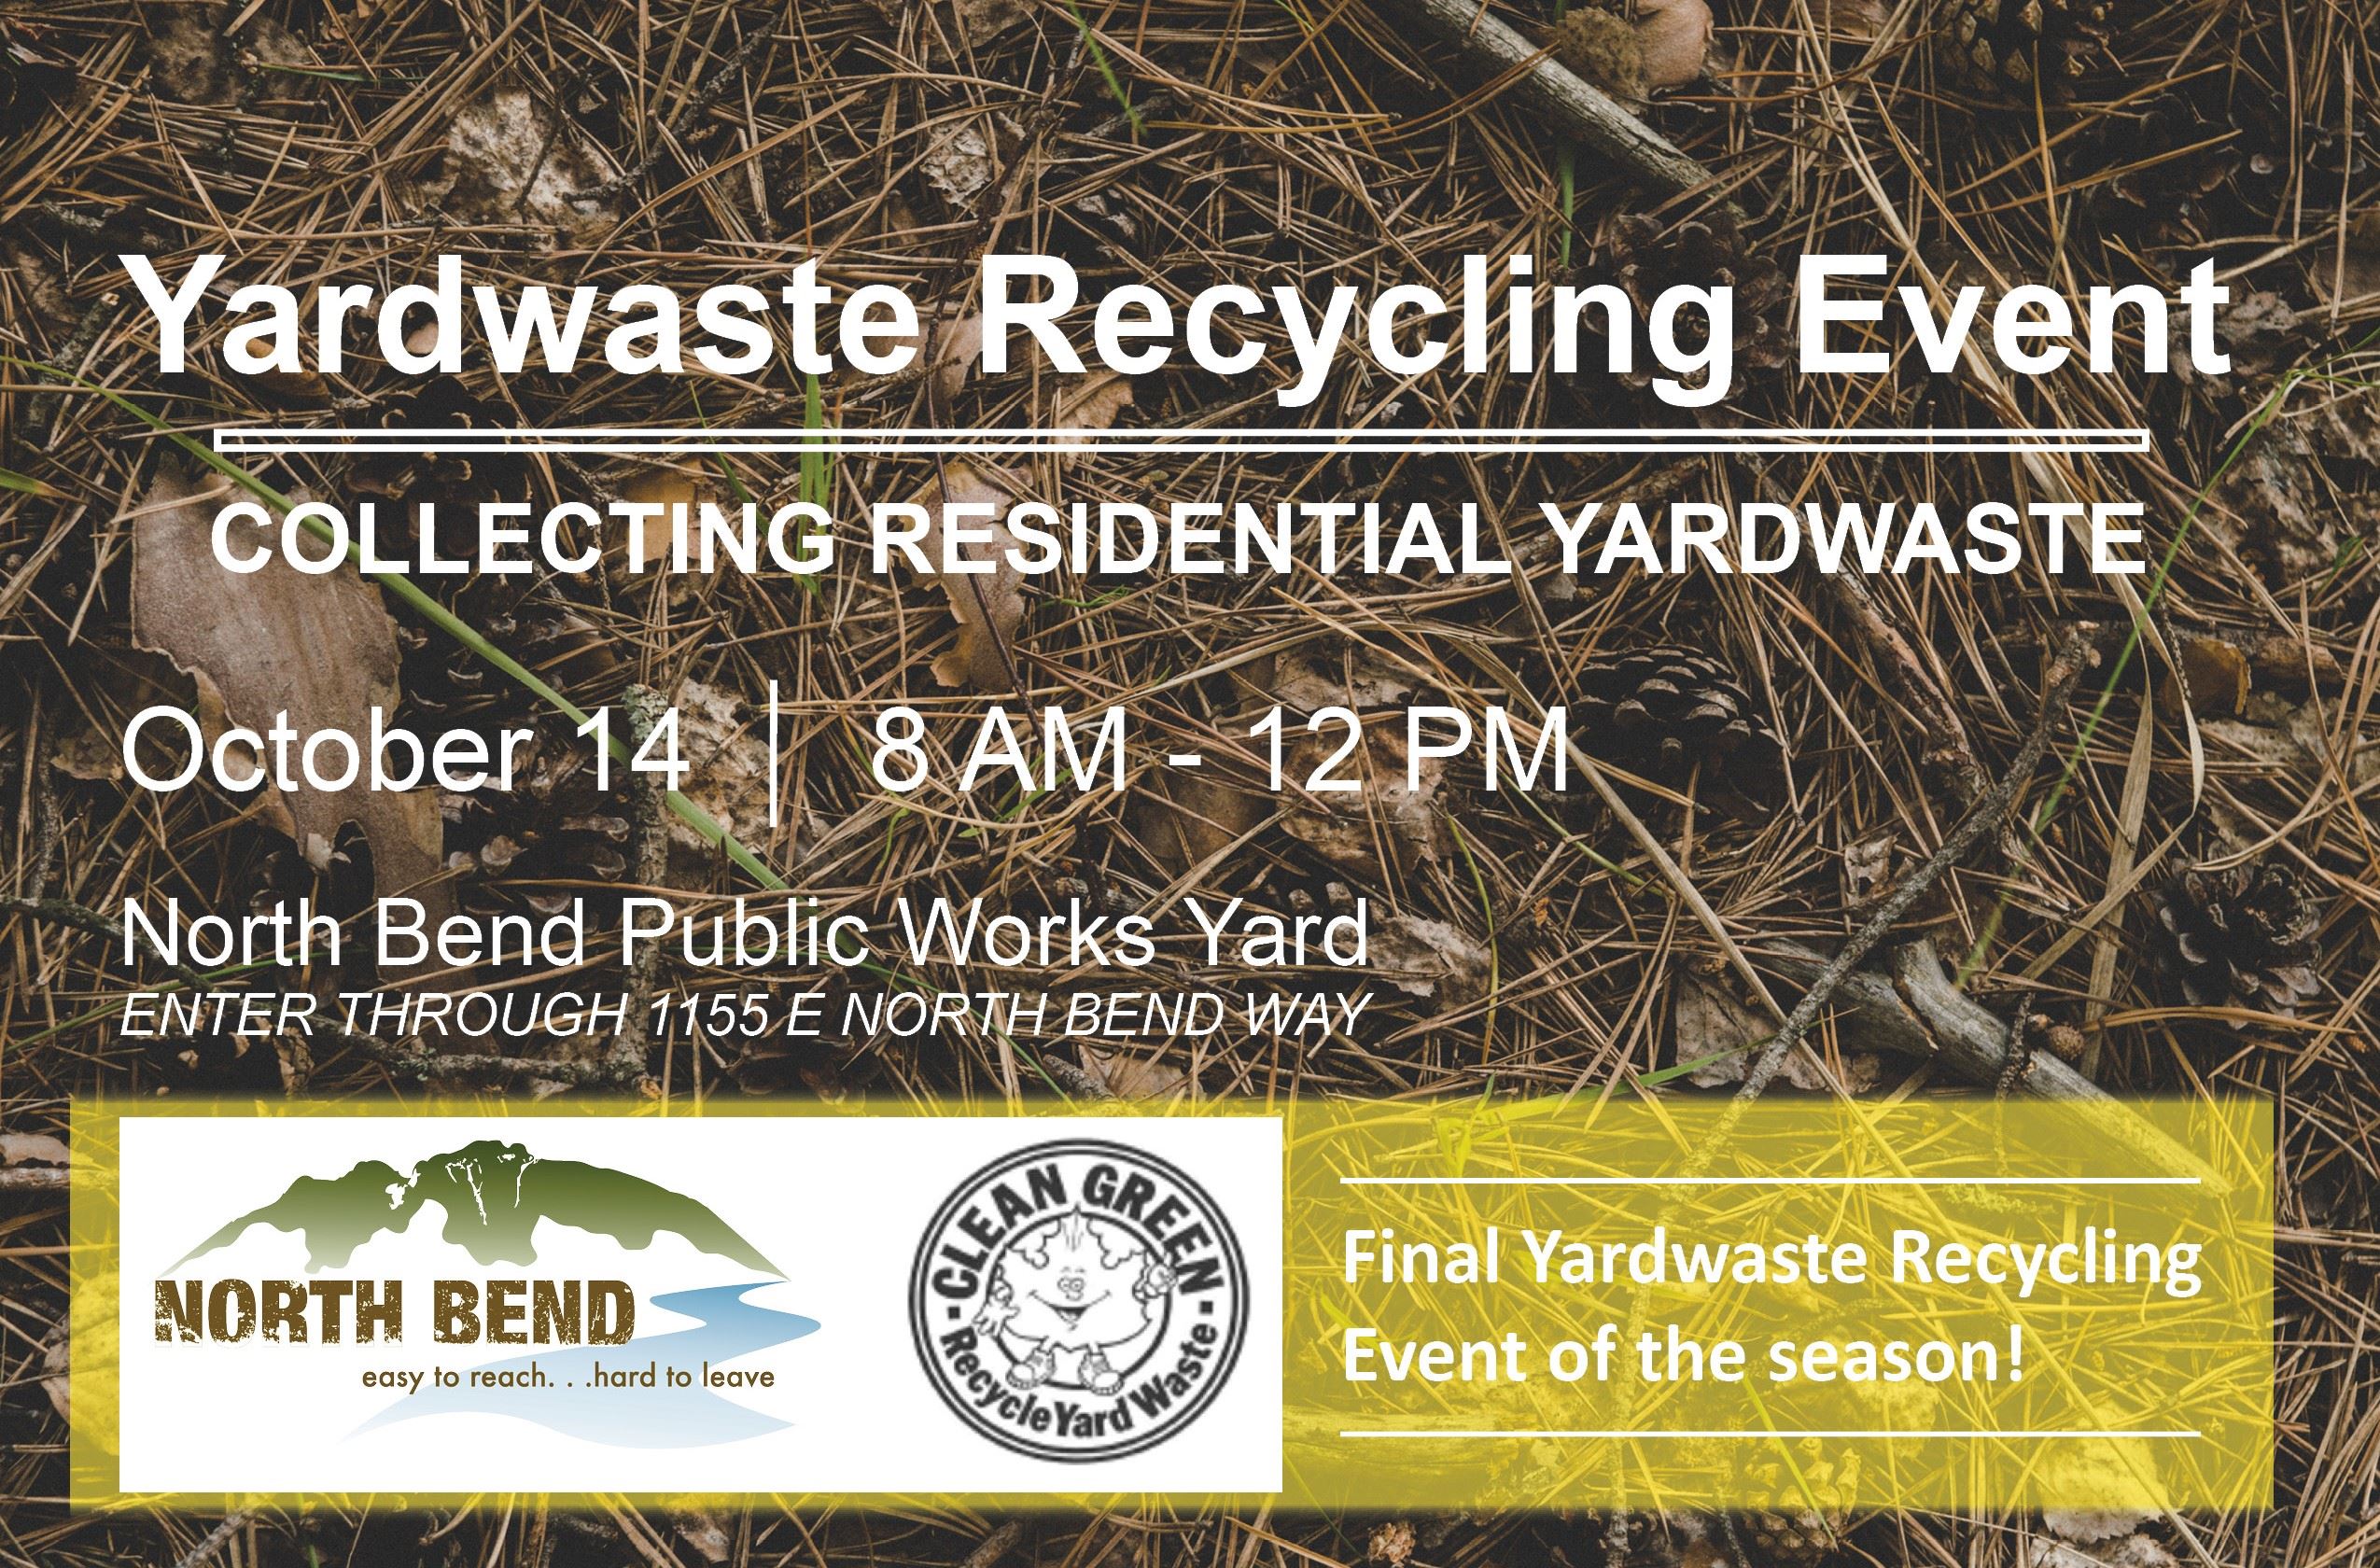  Final North Bend Yardwaste Recycling event, October 14 